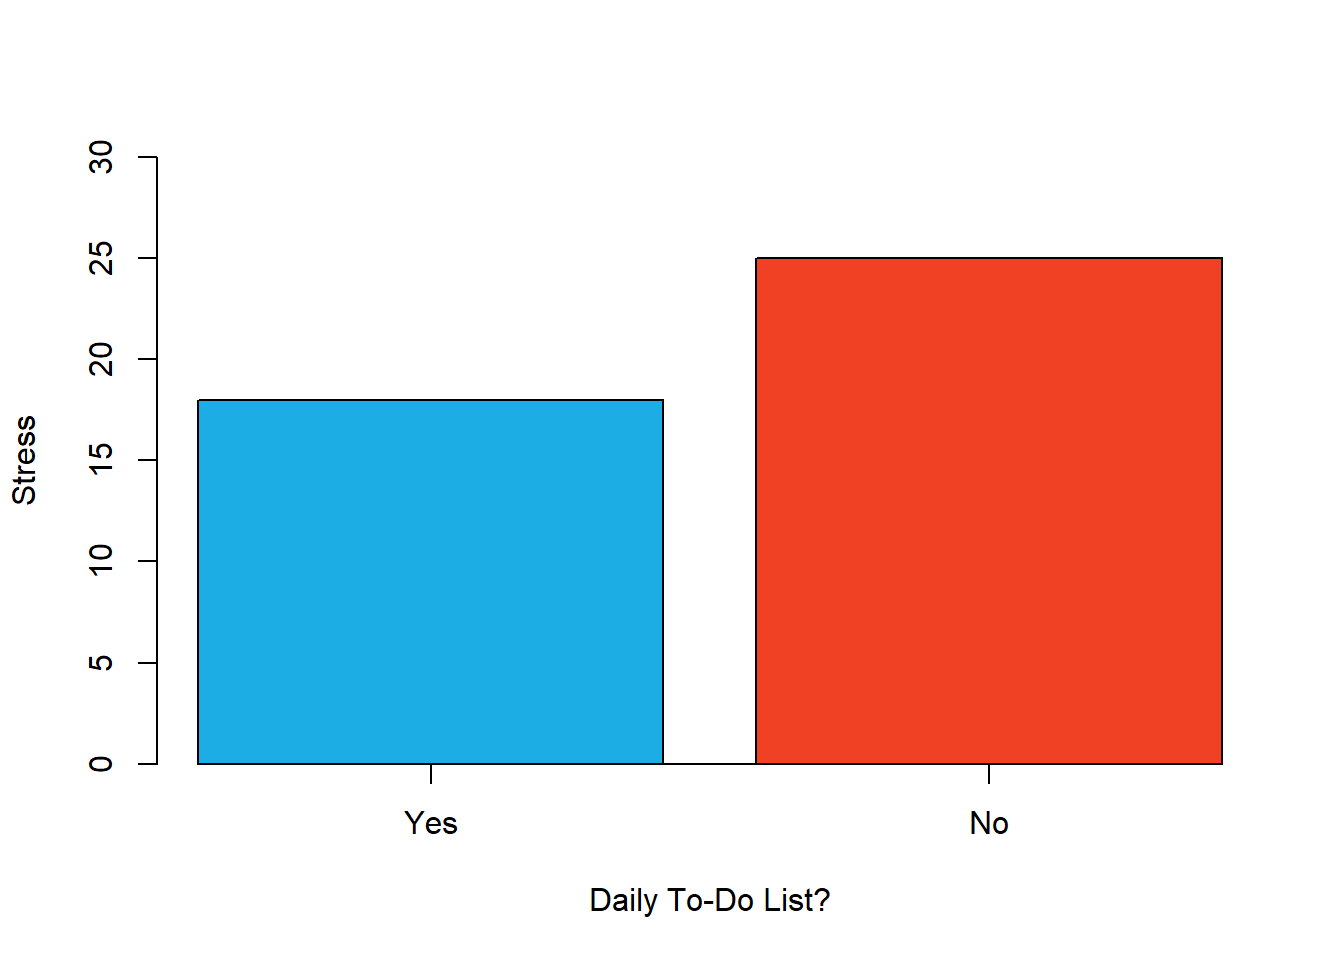 Results of a hypothetical study on whether people who make daily to-do lists experience less stress than people who do not make such lists.